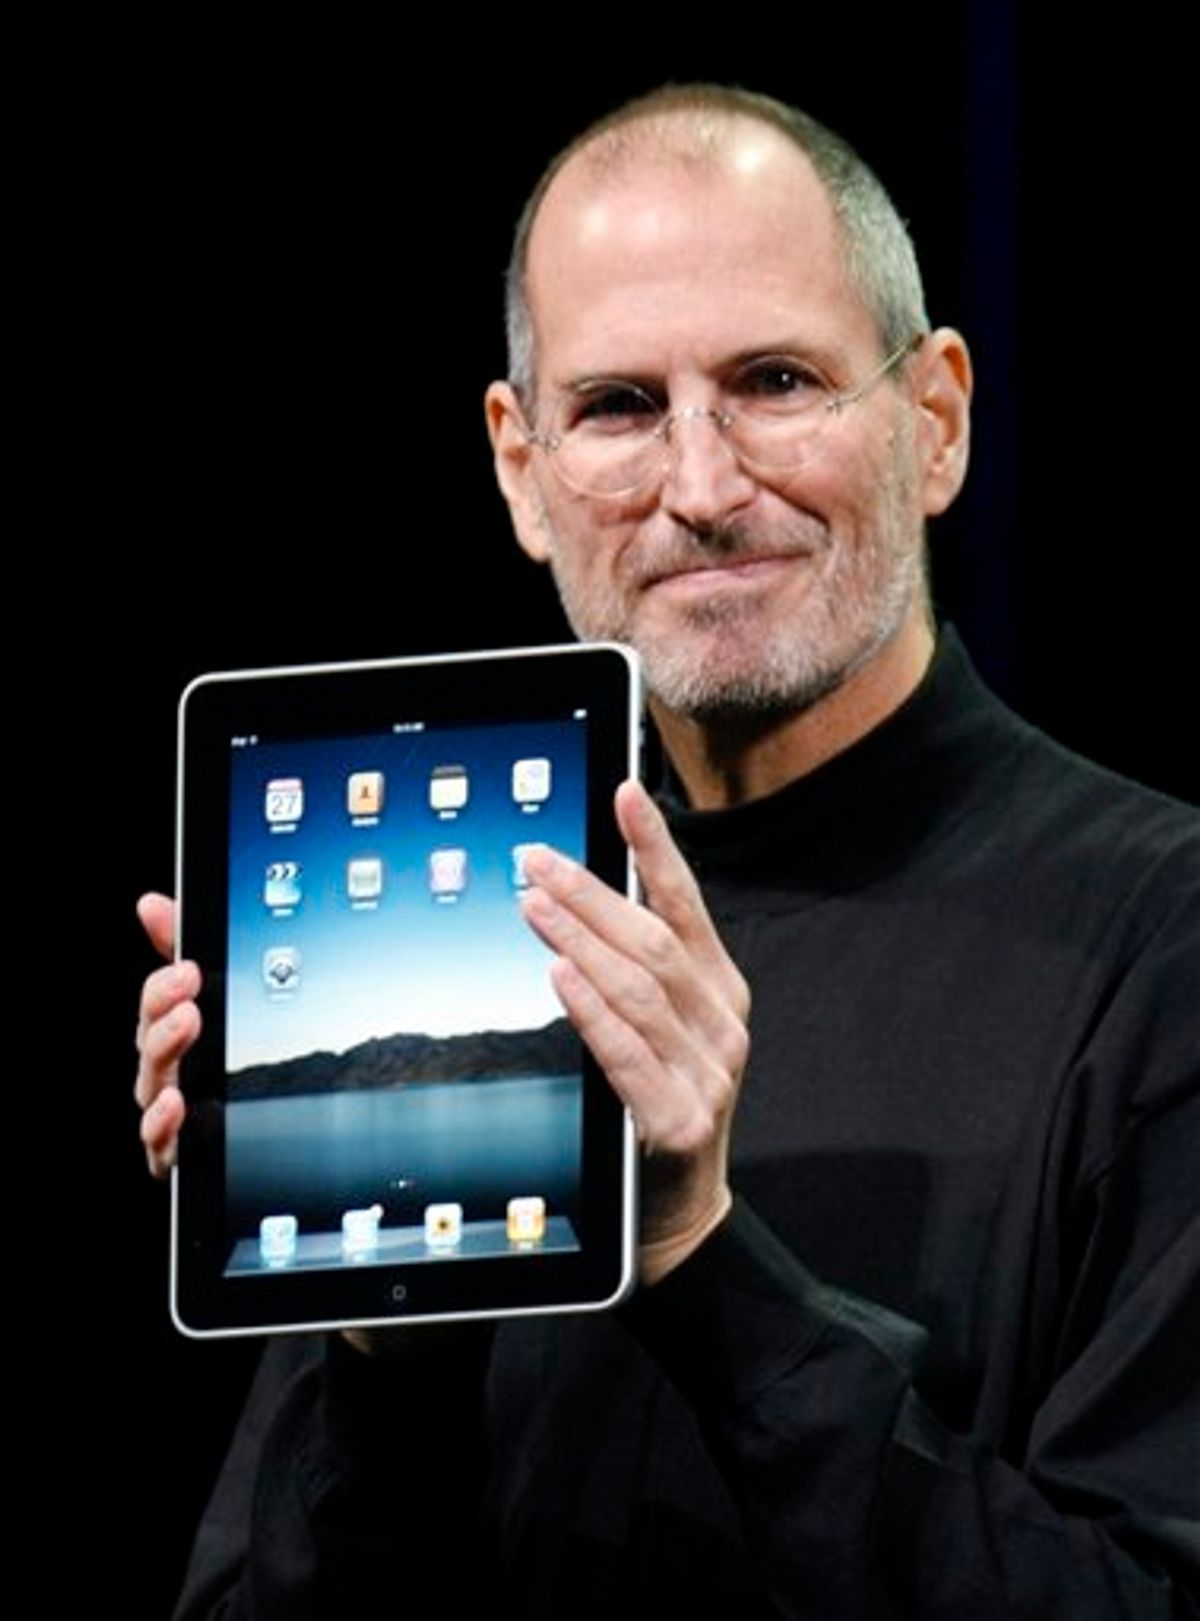 FILE - A Jan. 27, 2010 file photo shows Apple CEO Steve Jobs holding up the new iPad during a product announcement in San Francisco. Jobs sent a note Monday, Jan. 17, 2011 to employees saying he's taking a medical leave of absence so he can focus on his health. He says he will continue as CEO and be involved in major decisions but has asked Tim Cook to be responsible for all day-to-day operations. (AP Photo/Paul Sakuma, File) (AP)